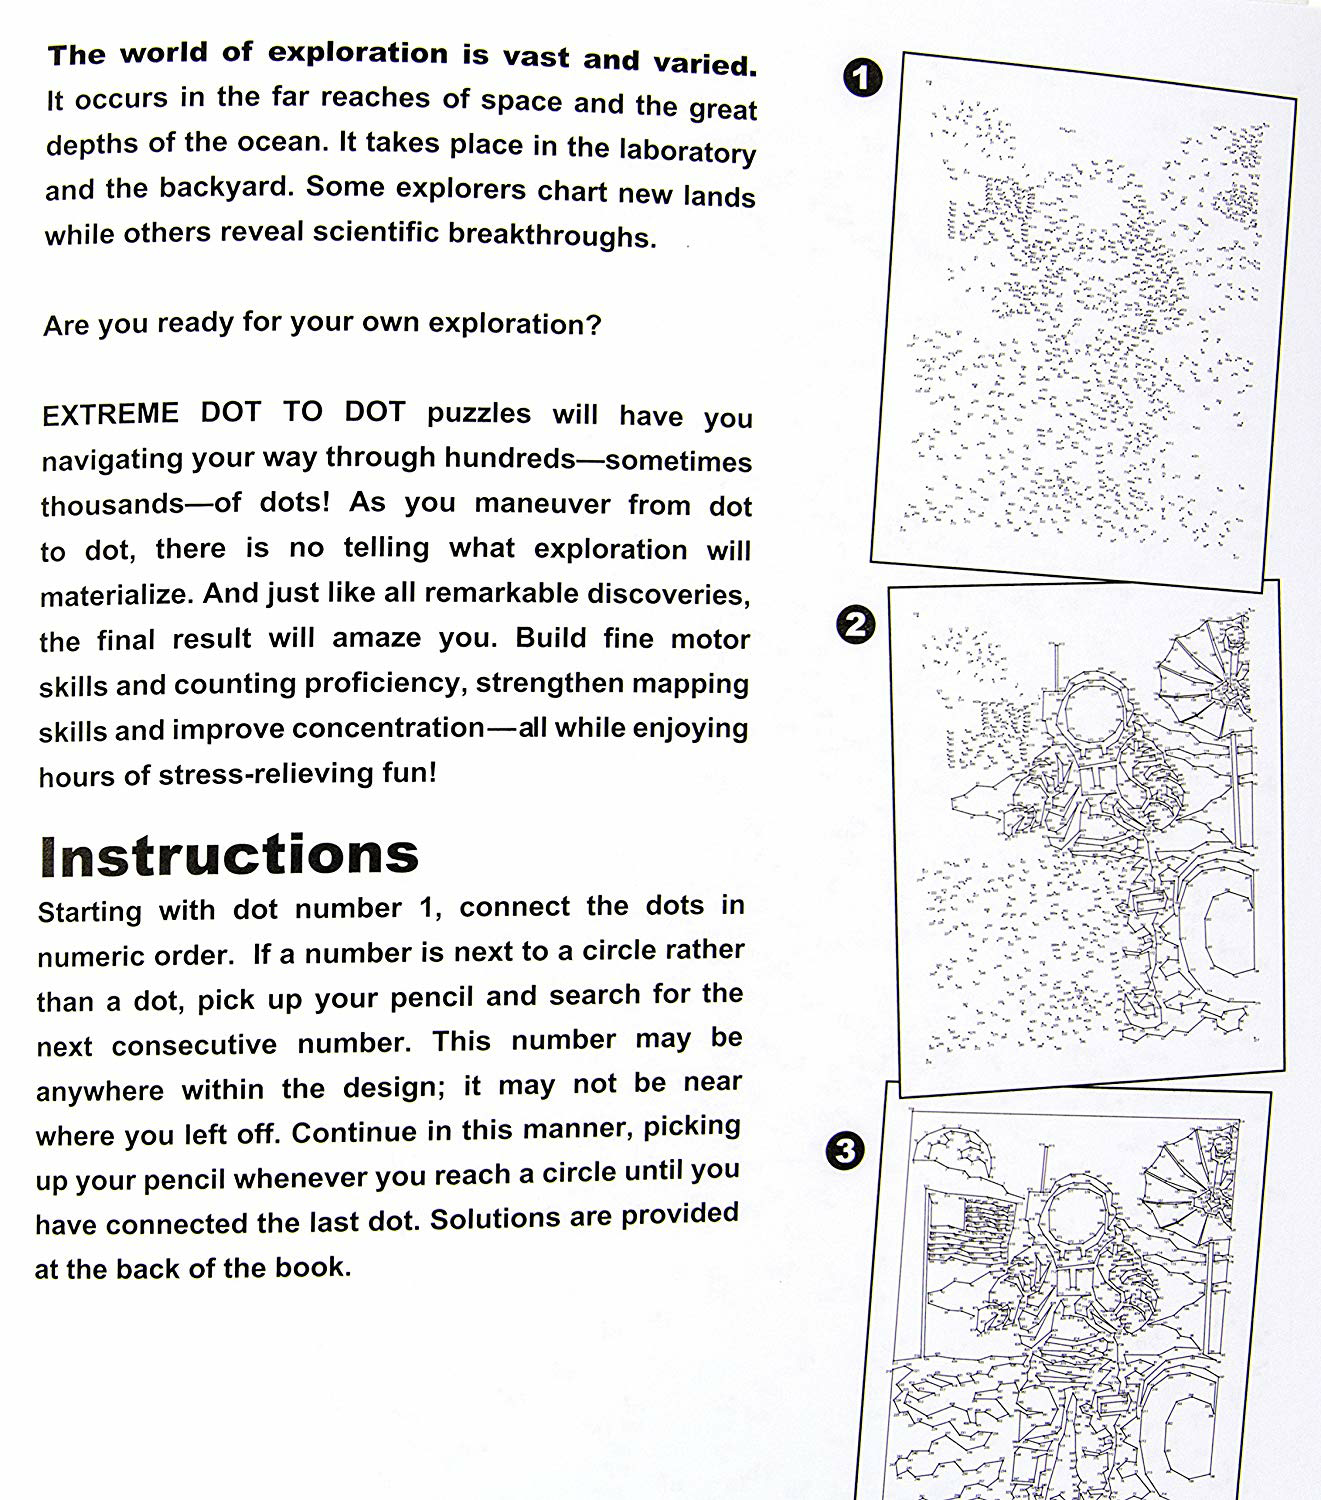 High Quality Dot to dot puzzle astronaut with solution Blank Meme Template